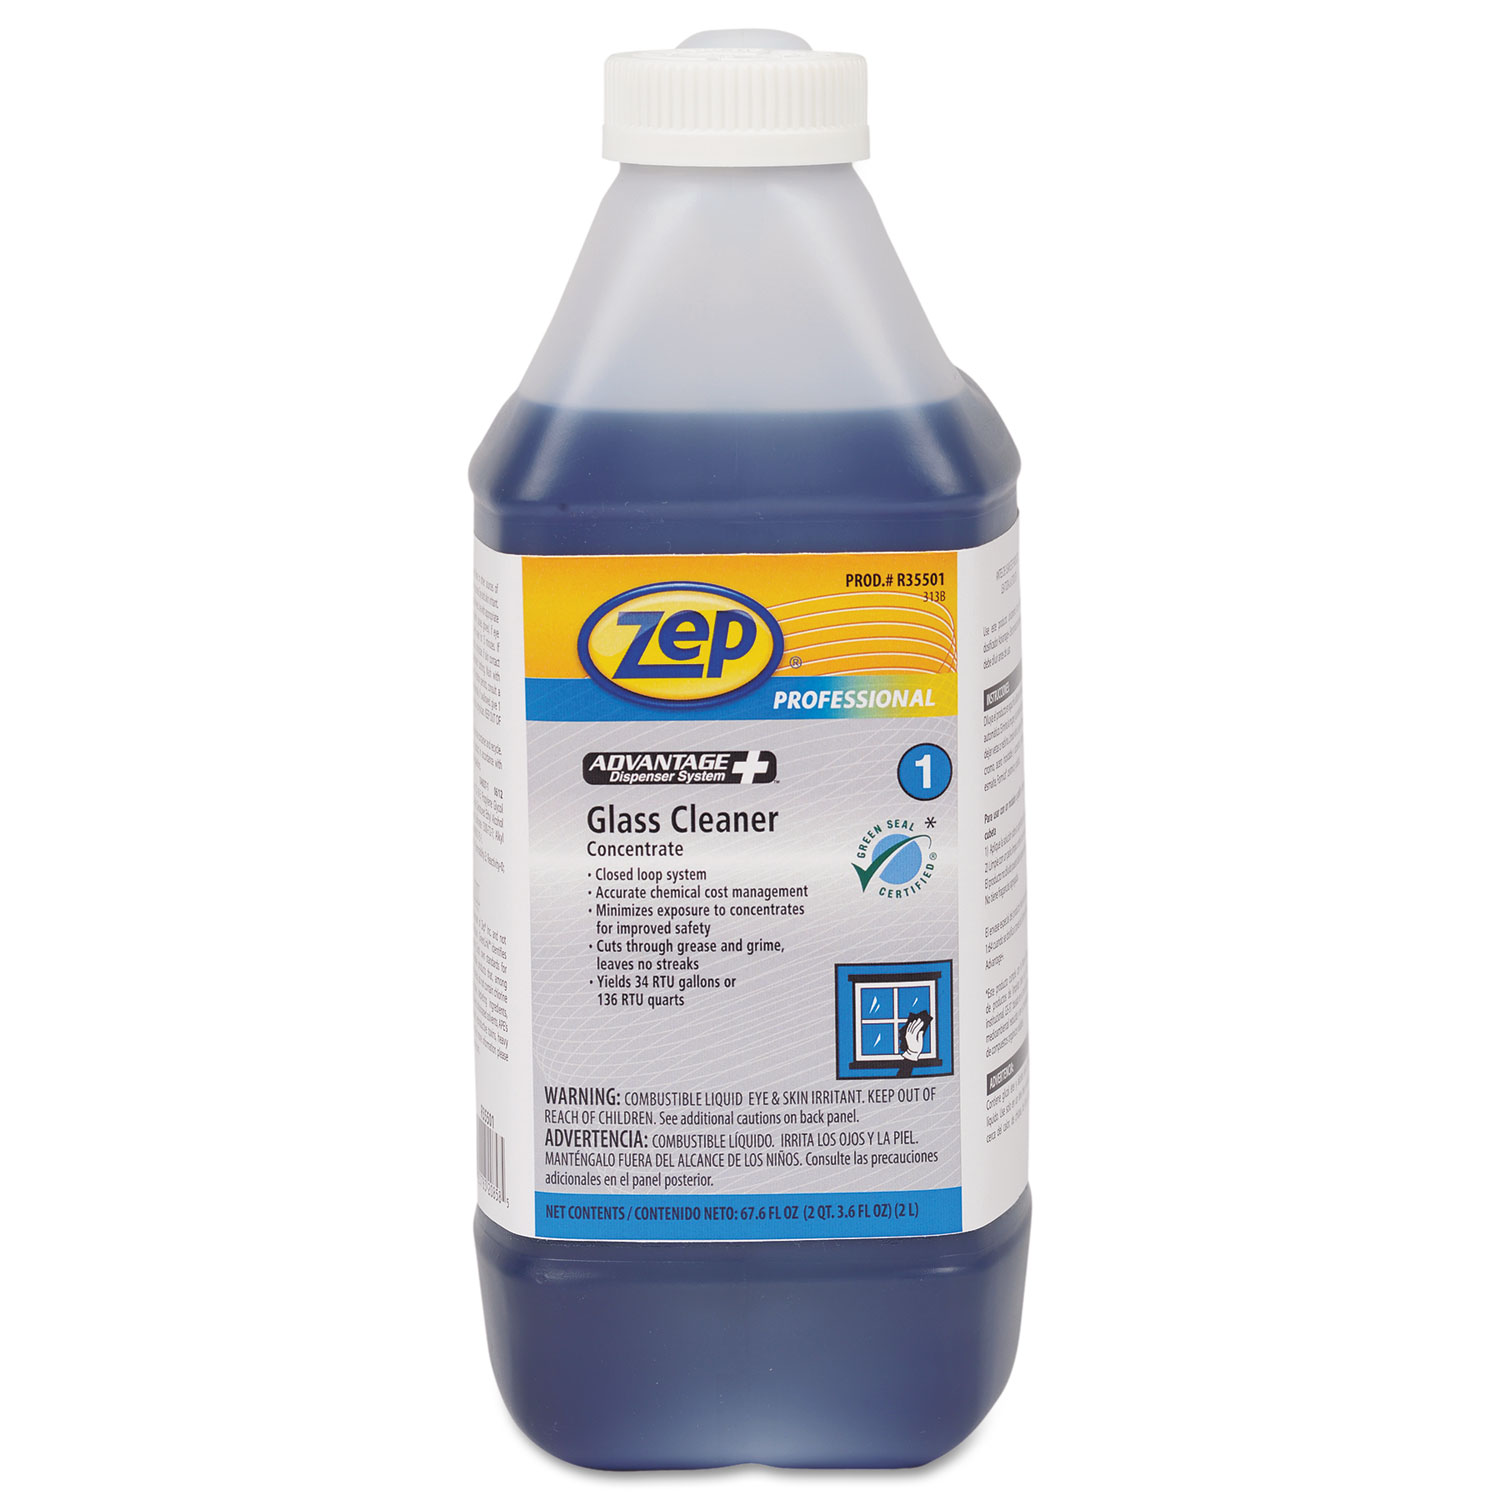 Advantage+ Concentrated Glass Cleaner, 67.6 oz Bottle